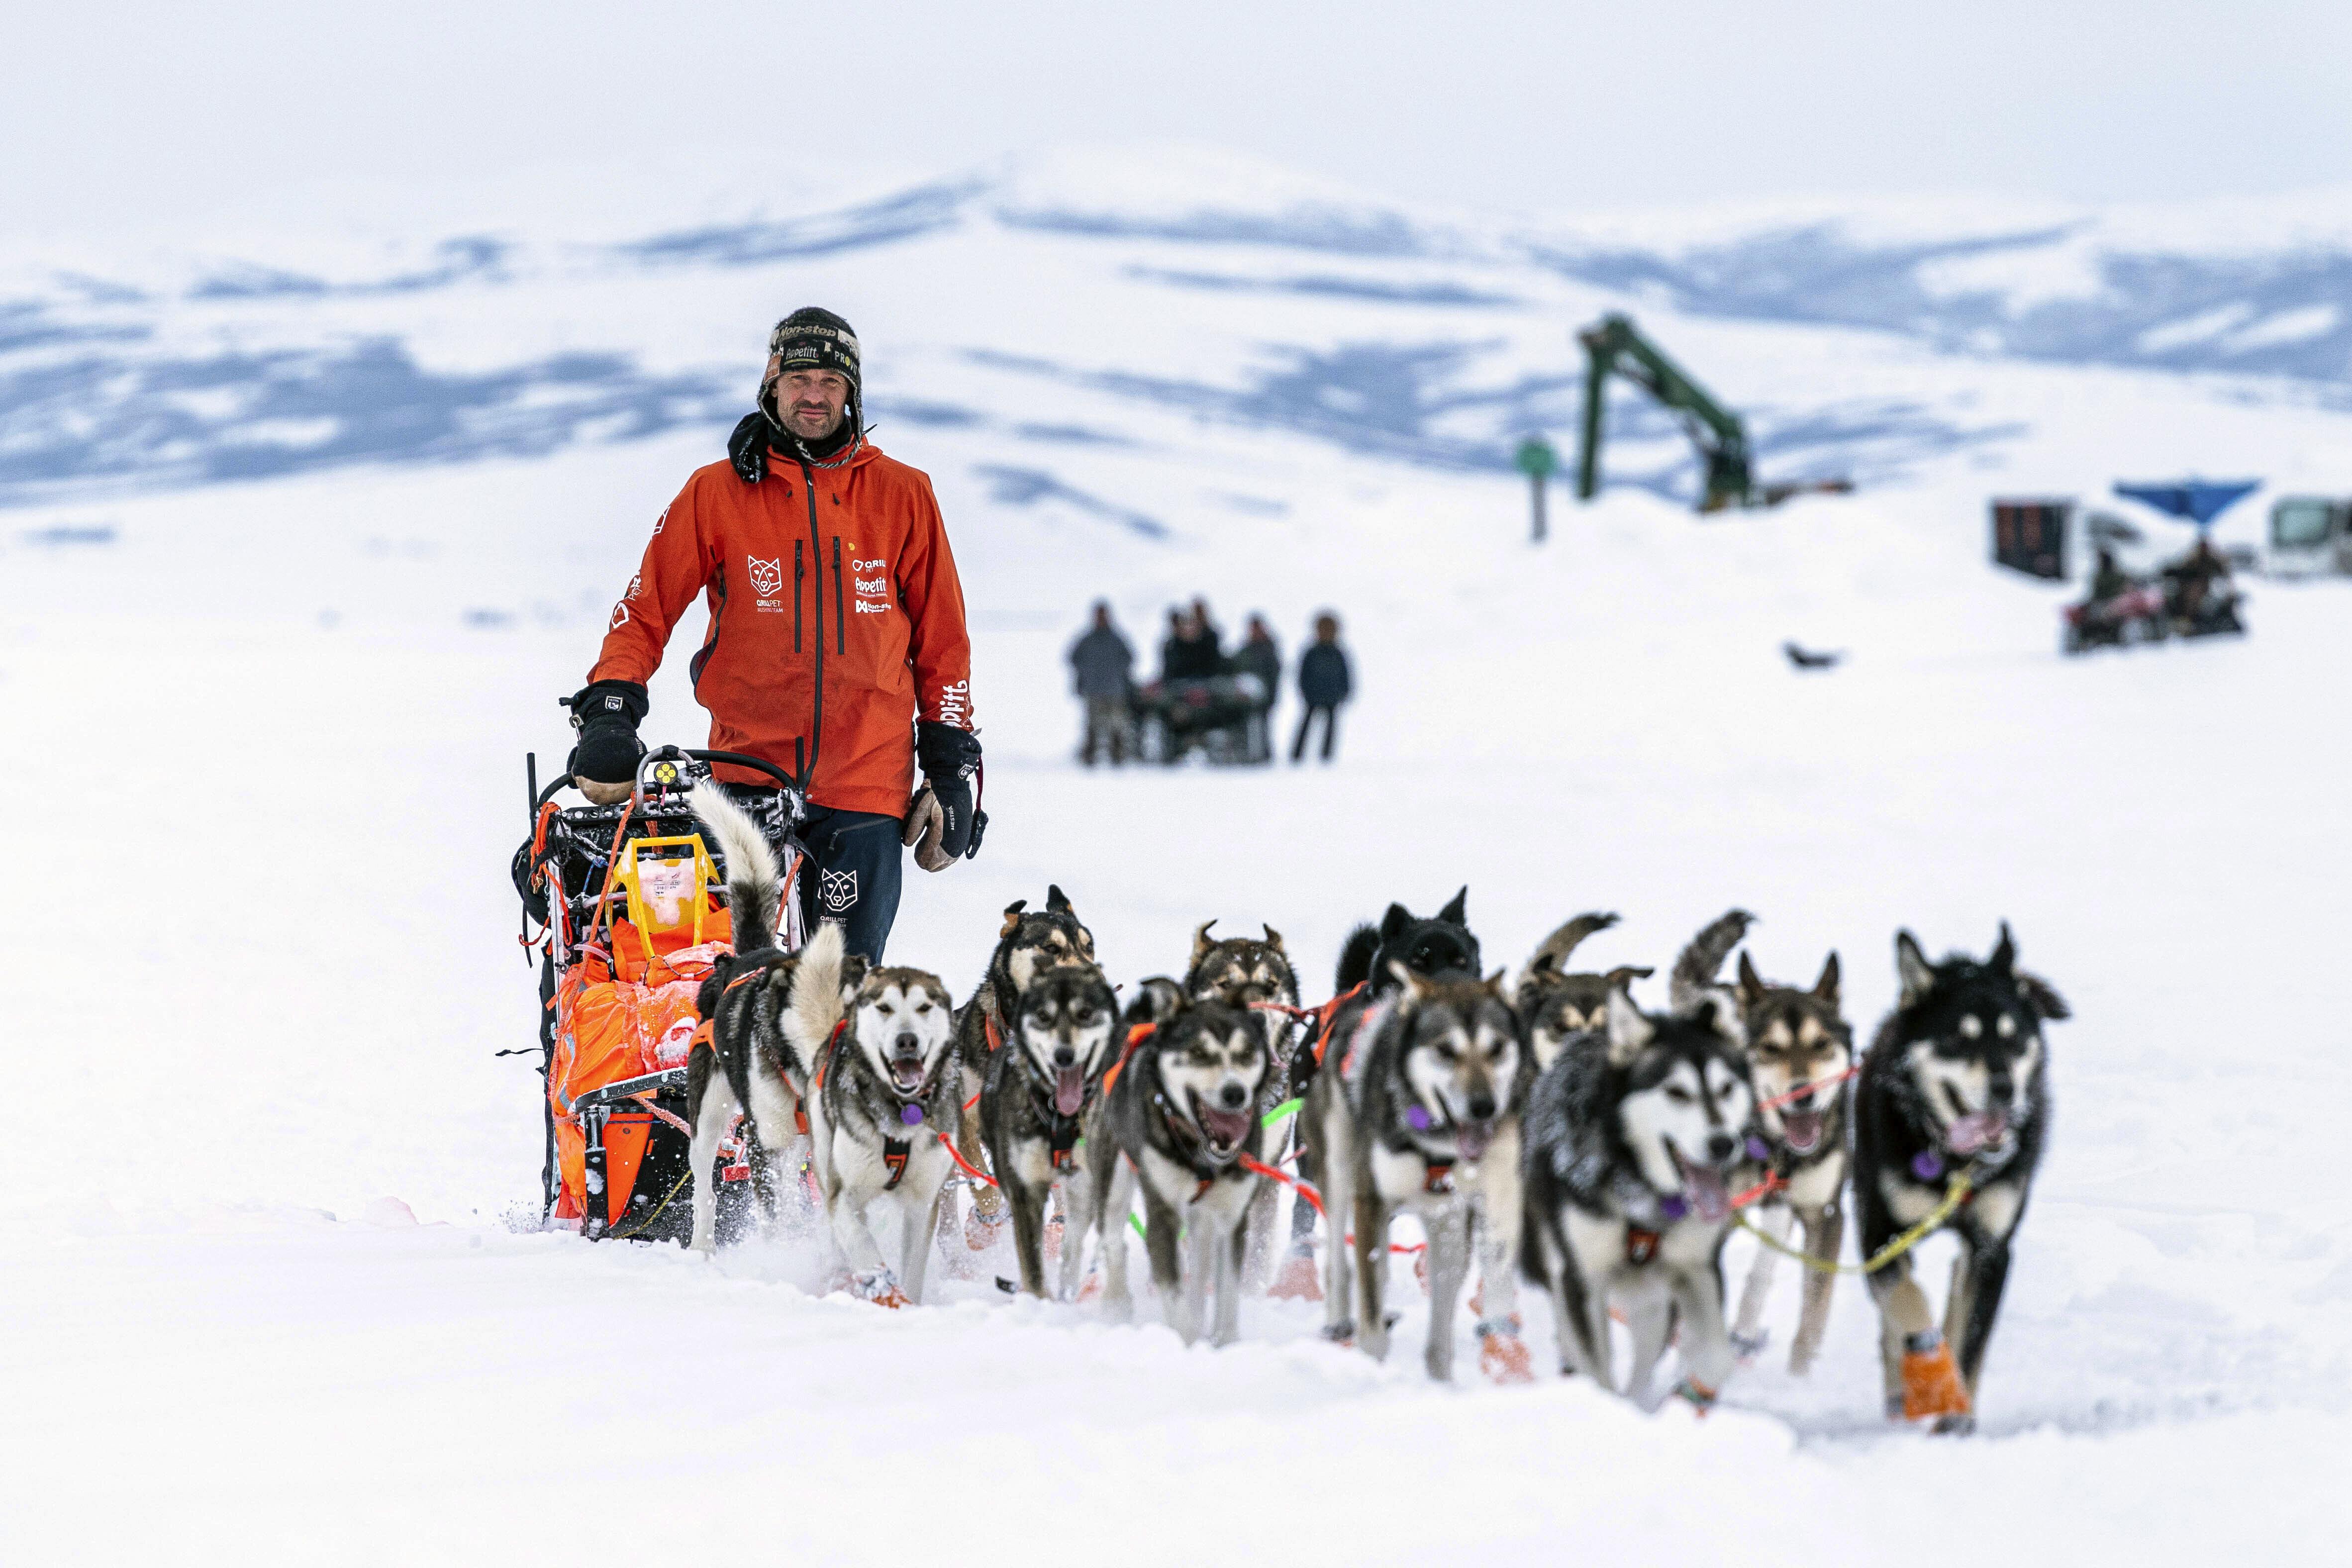 Iditarod mushes on; fans being urged to skip finish in Nome The